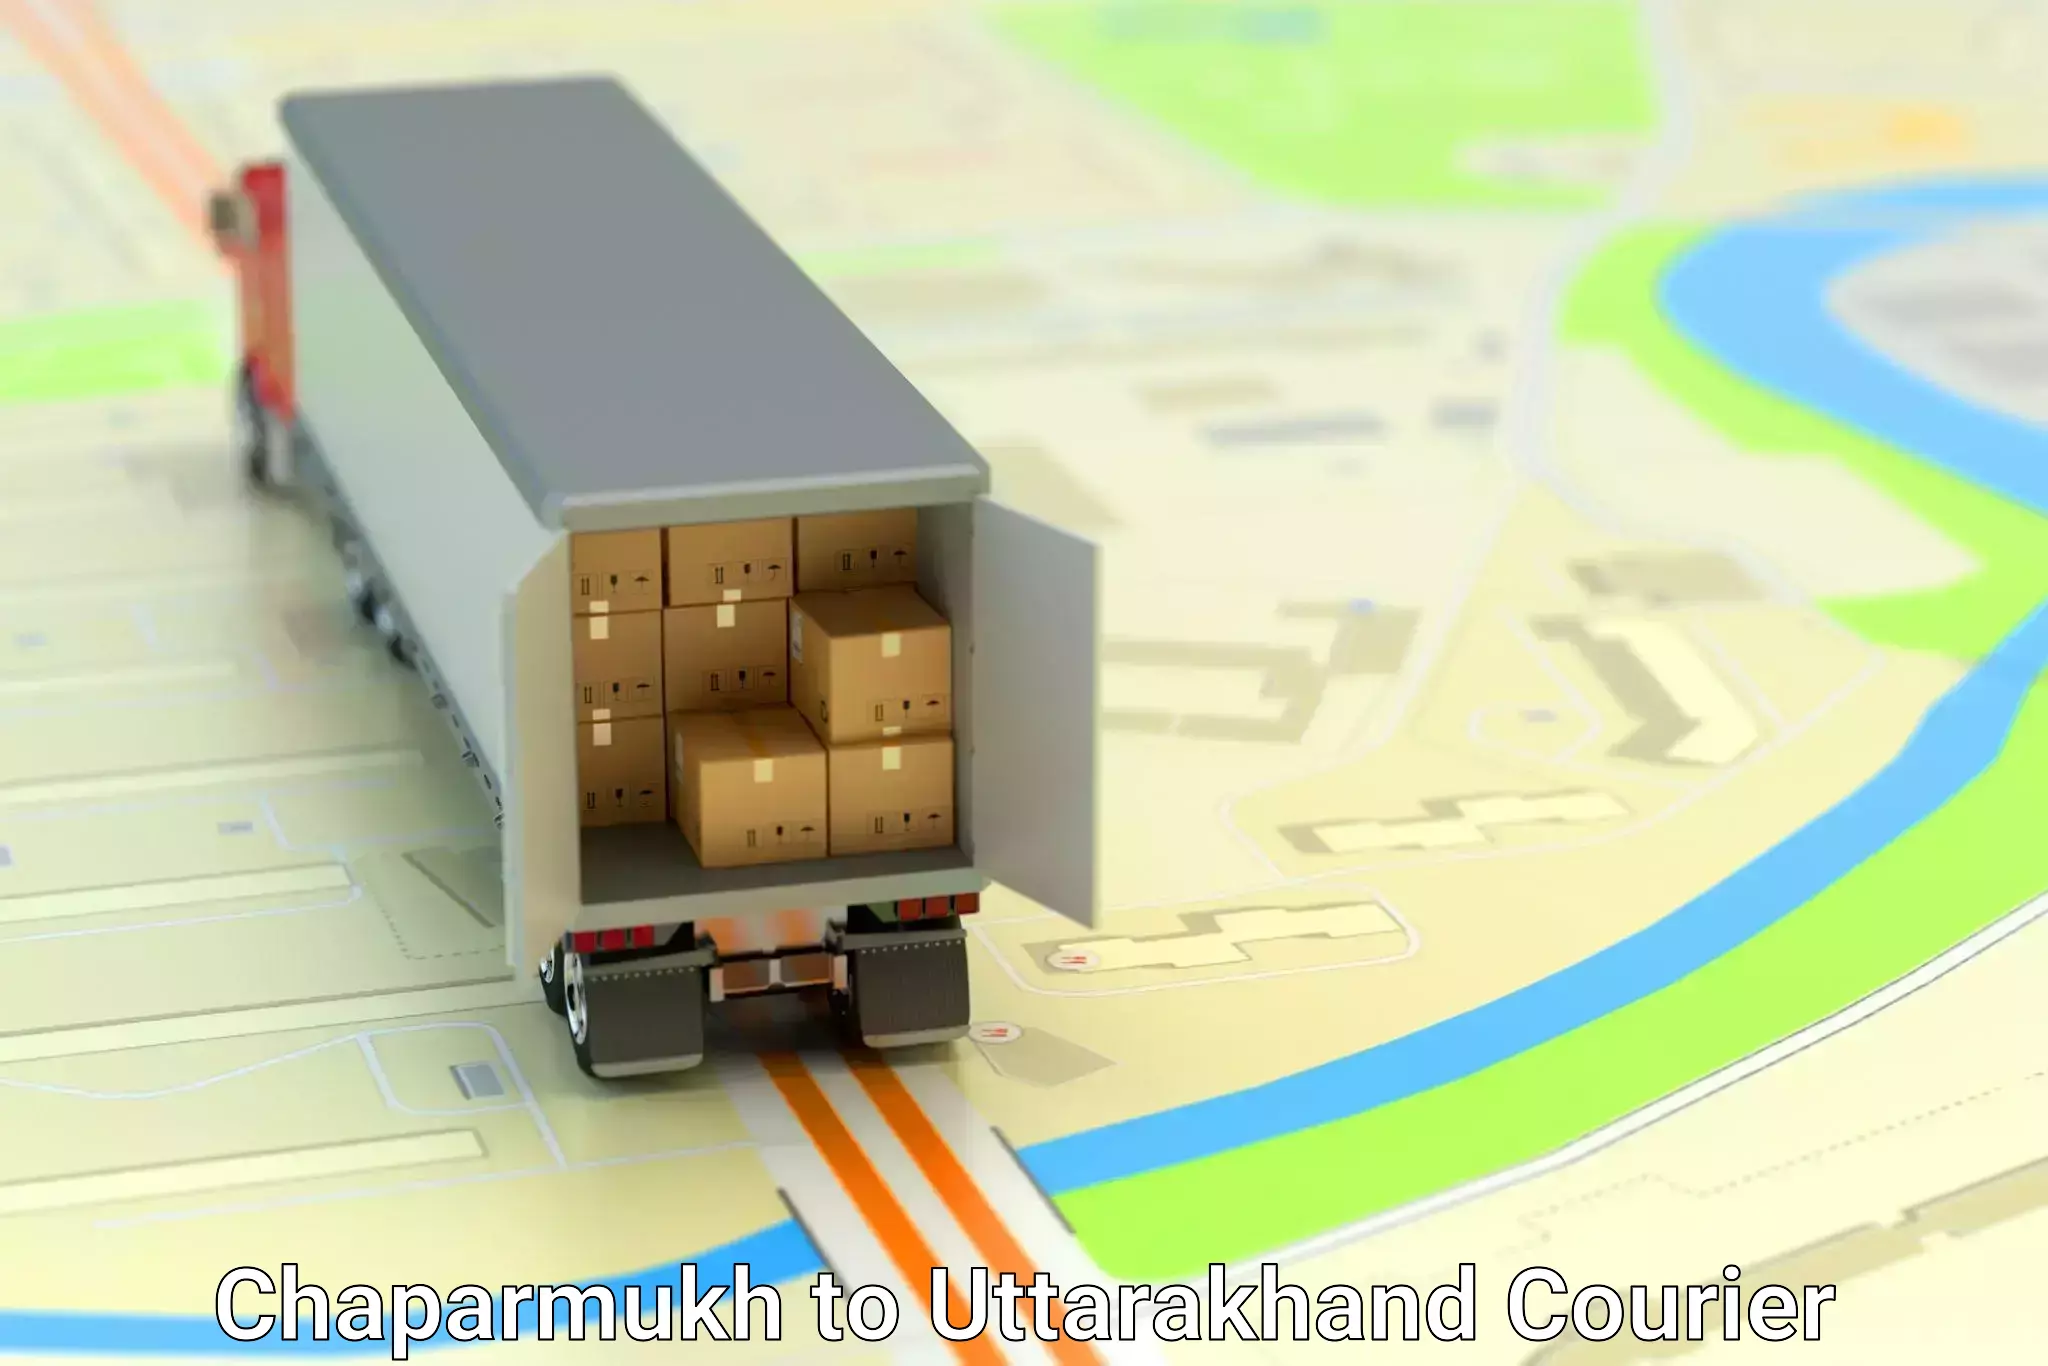 Large package courier Chaparmukh to Lansdowne